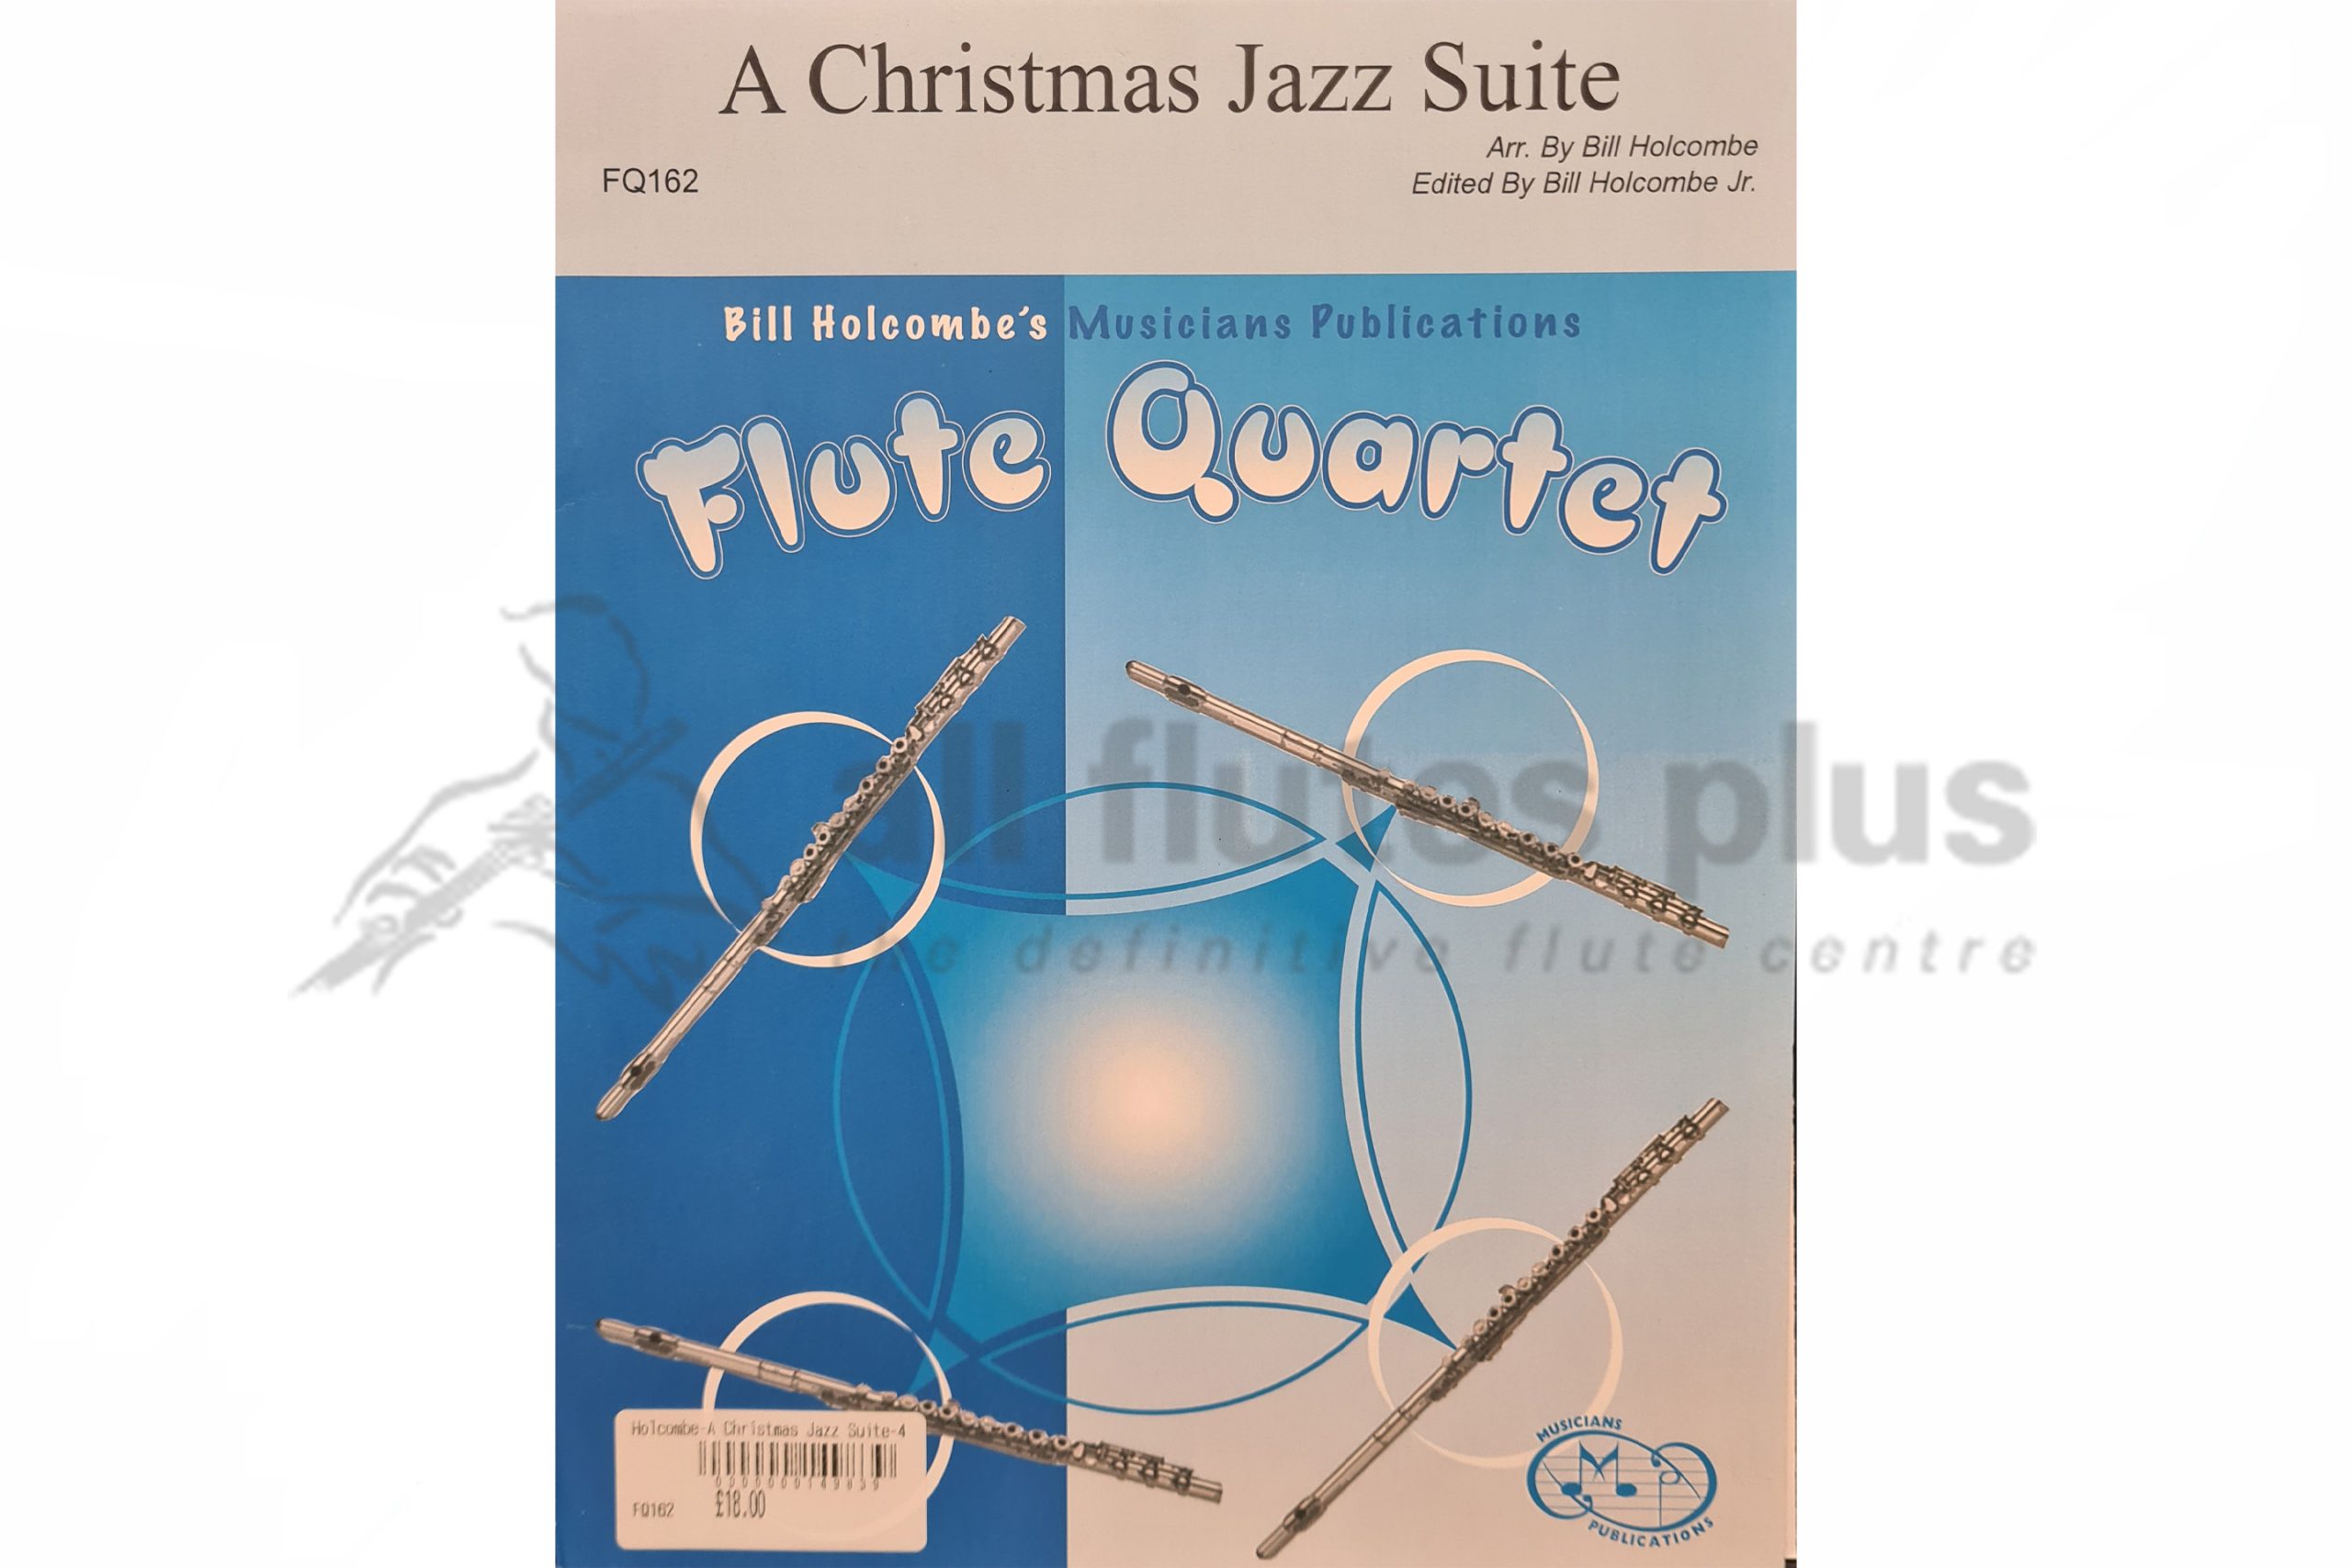 A Jazz Christmas Suite for Flute Quartet by Holcombe